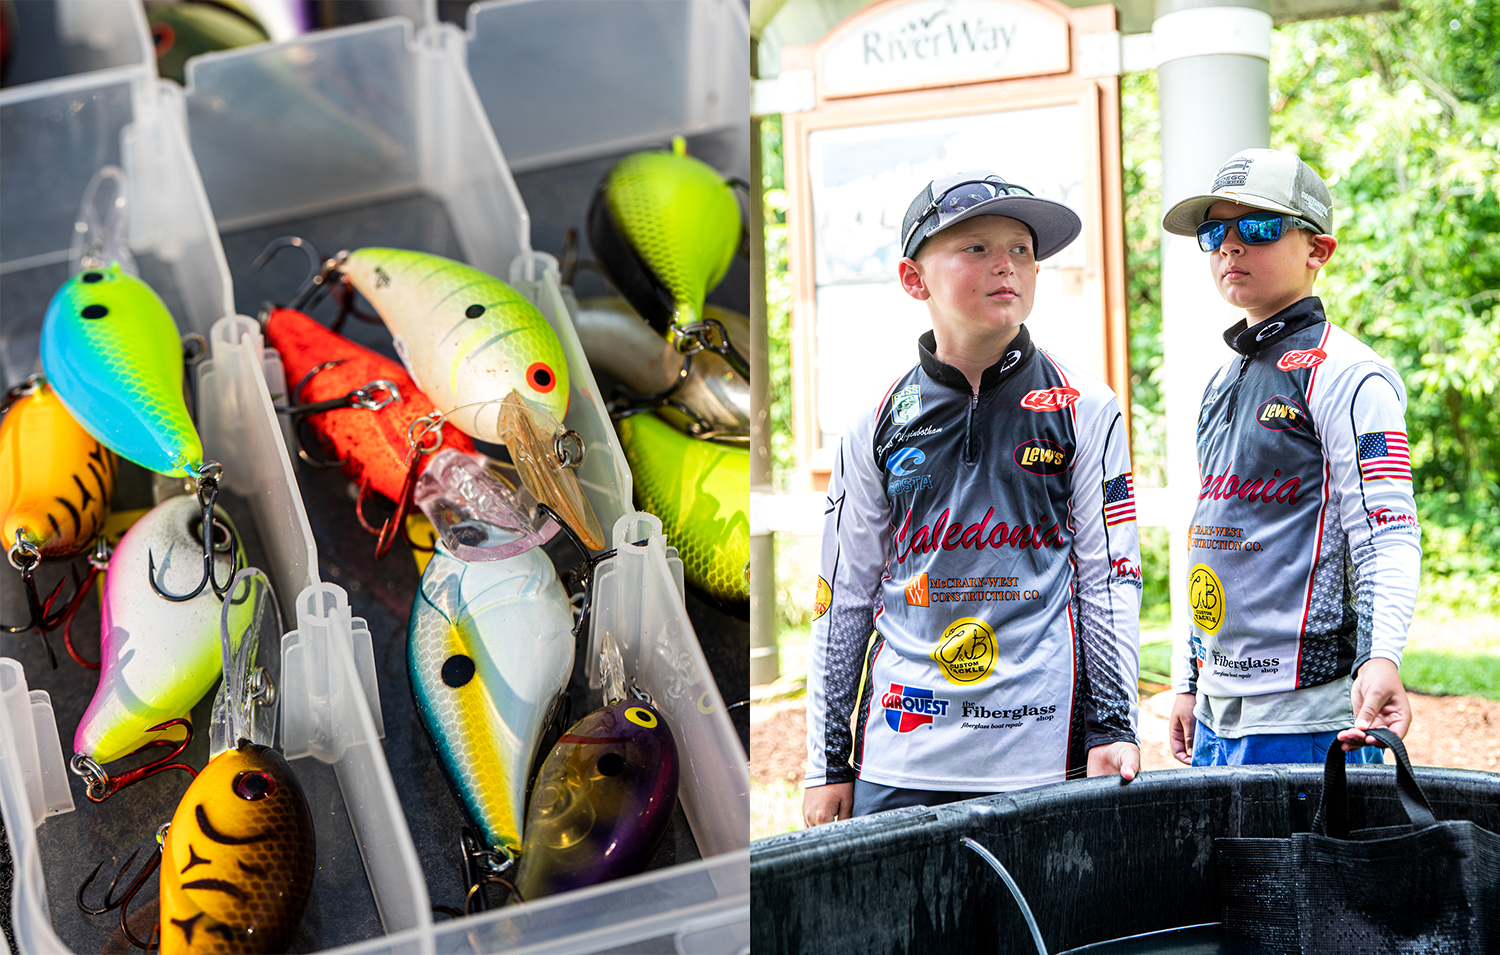 Crankbaits in a box and two kids wait with their fish for weigh-in